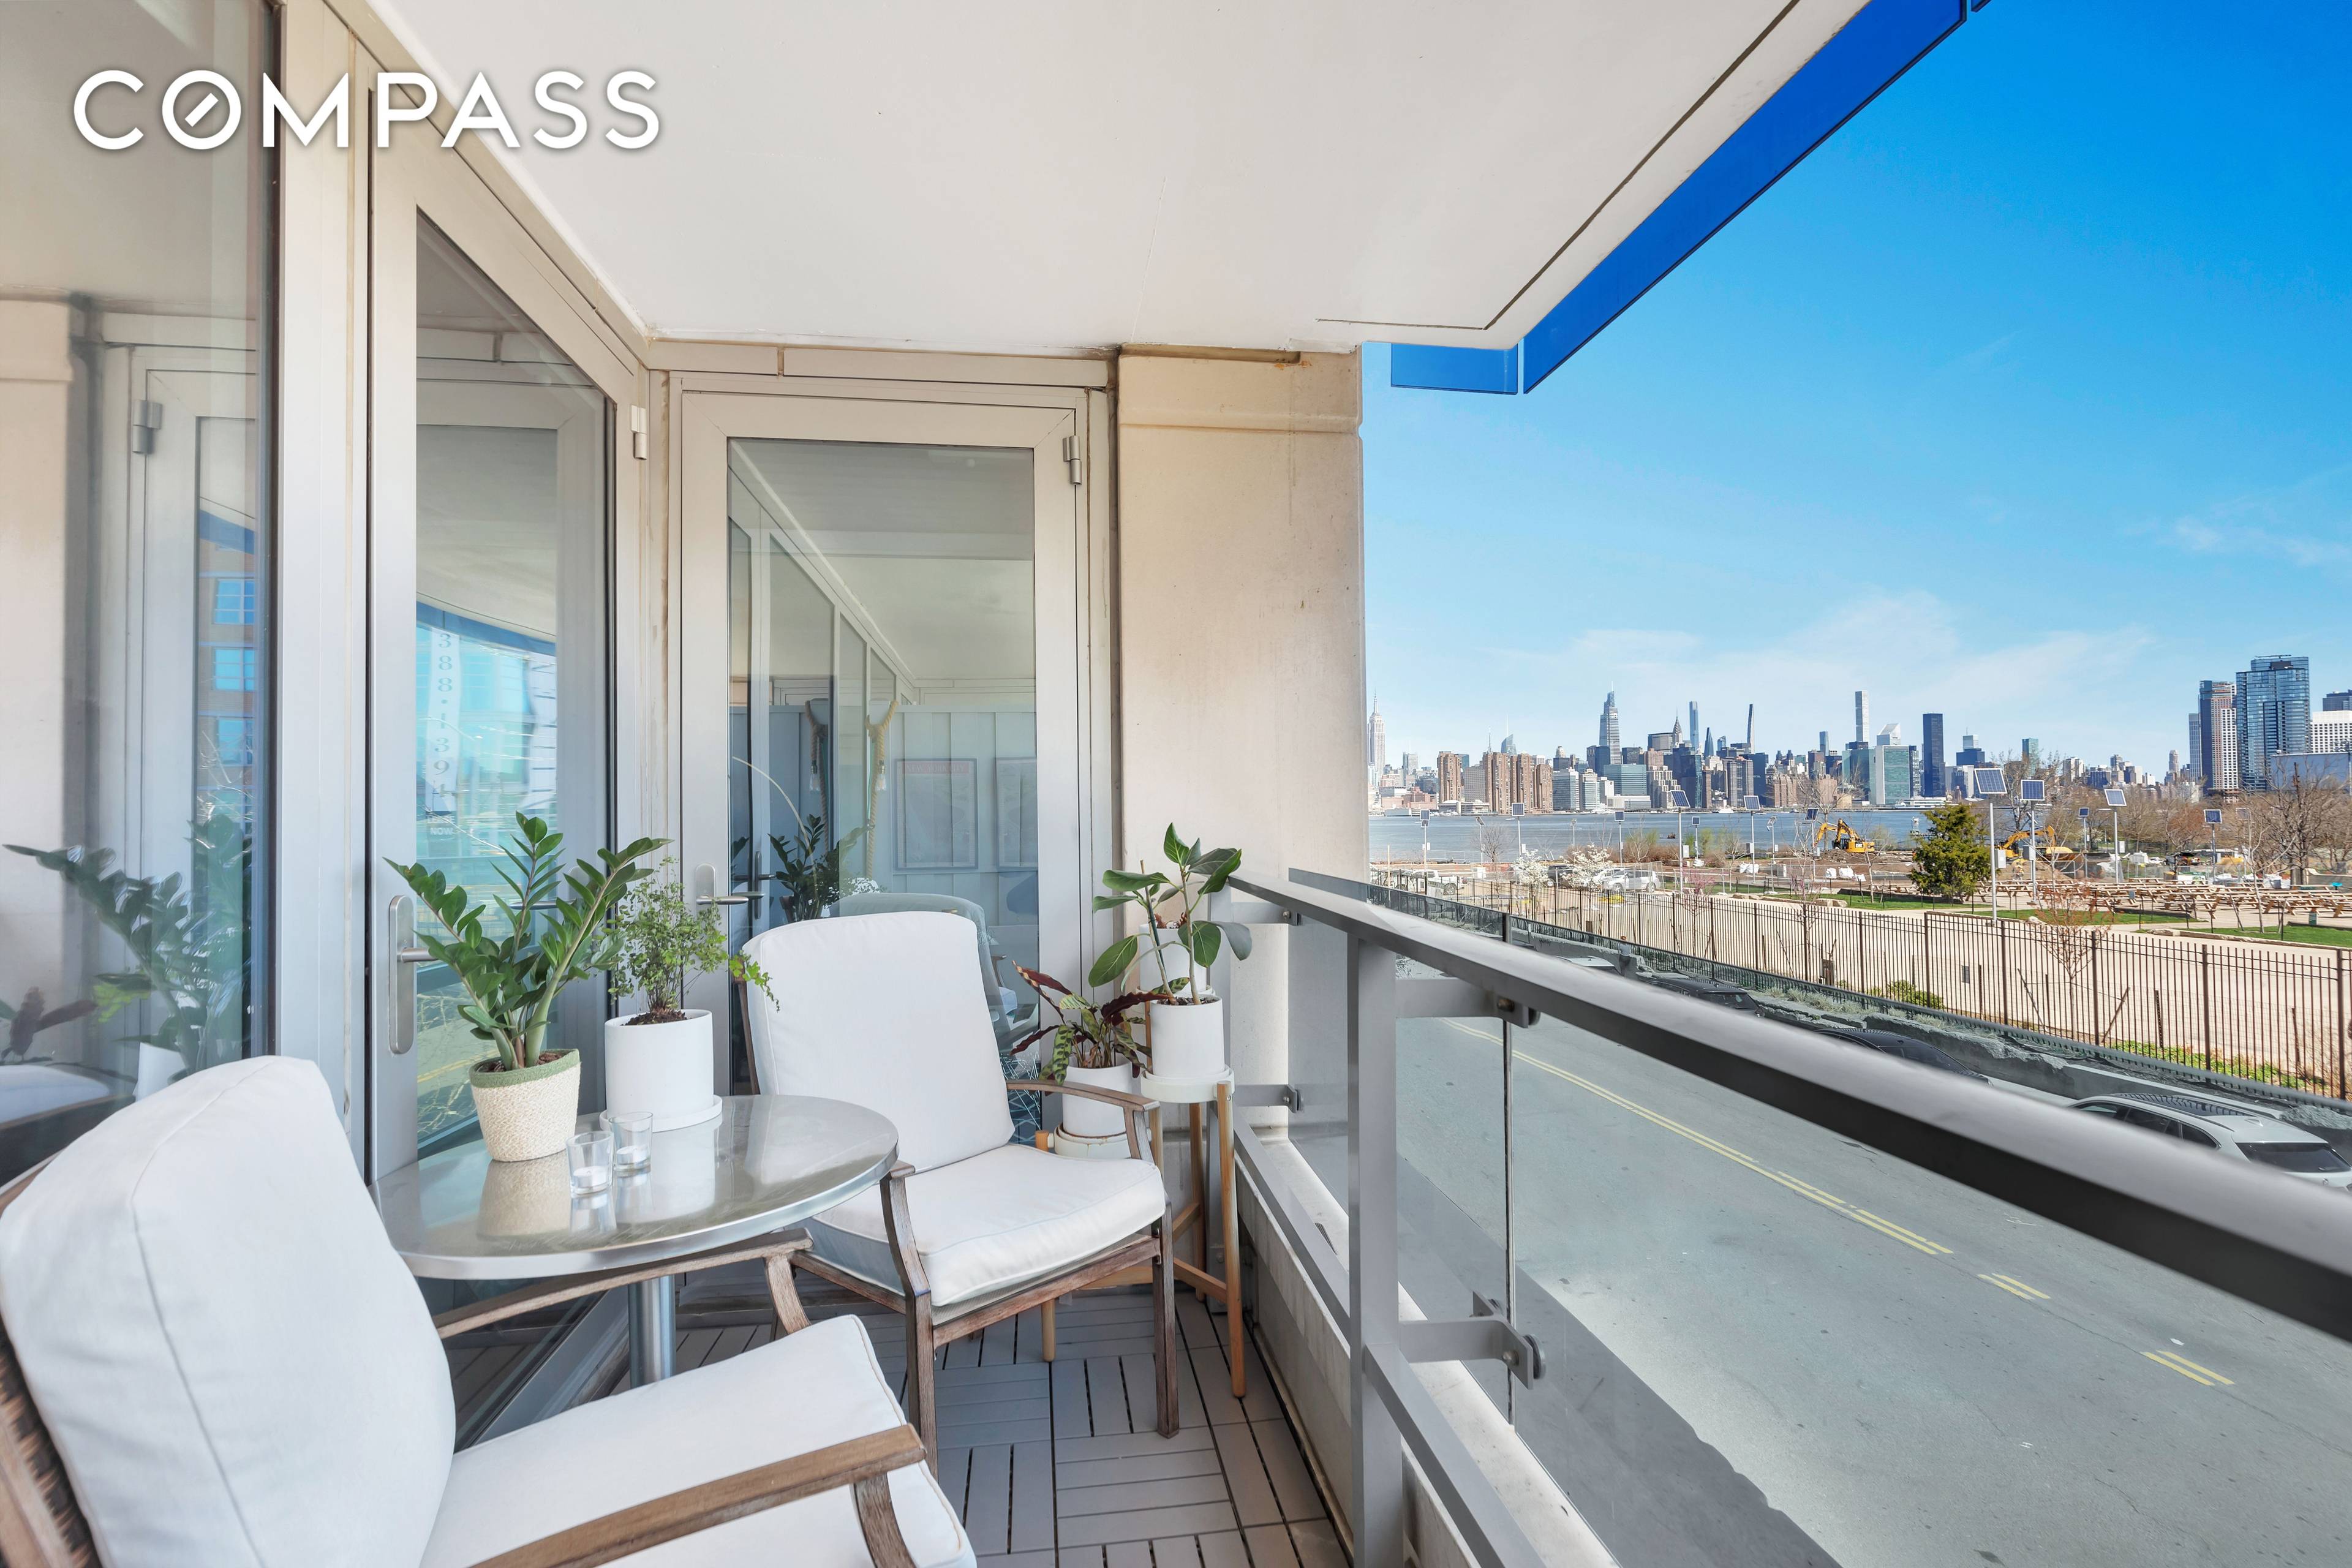 The Edge Condominium Recently Featured on Pix11 s Design Recipes Williamsburg s Premier Condo The EDGE Beautiful 2BD 1BA with Private Balcony, River and City Views, Expansive Layout, Chef s ...